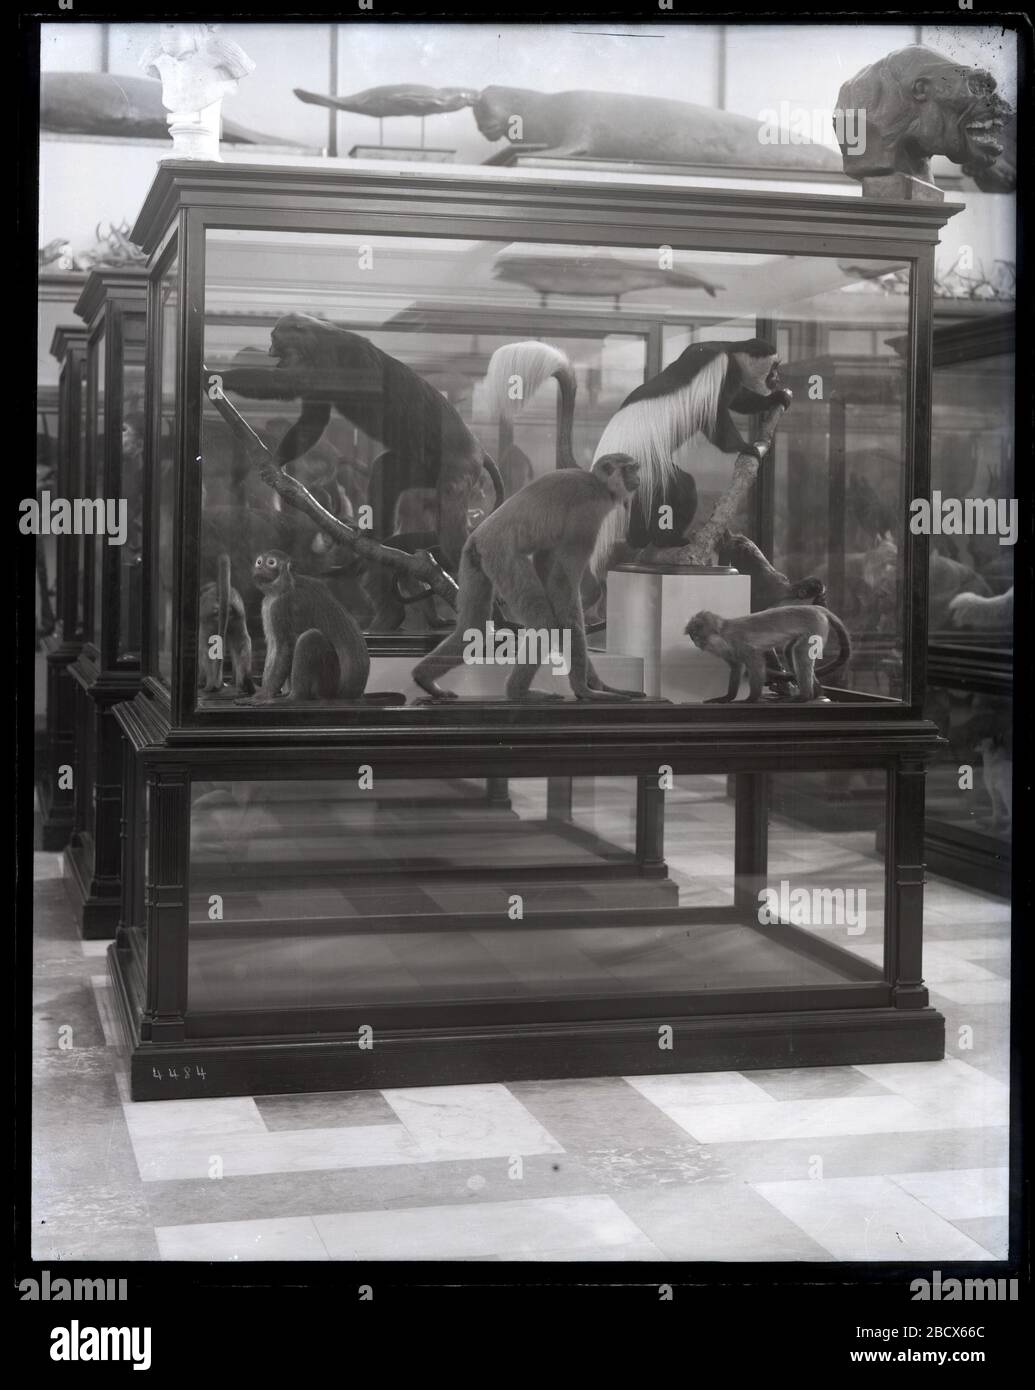 Mammals Exhibits. Mammals exhibits in the United States National Museum, now known as the Arts and Industries Building, featuring exhibit case containing models of several species of monkey.Smithsonian Institution Archives, Acc. 11-007, Box 020, Image No. MNH-4484 Stock Photo